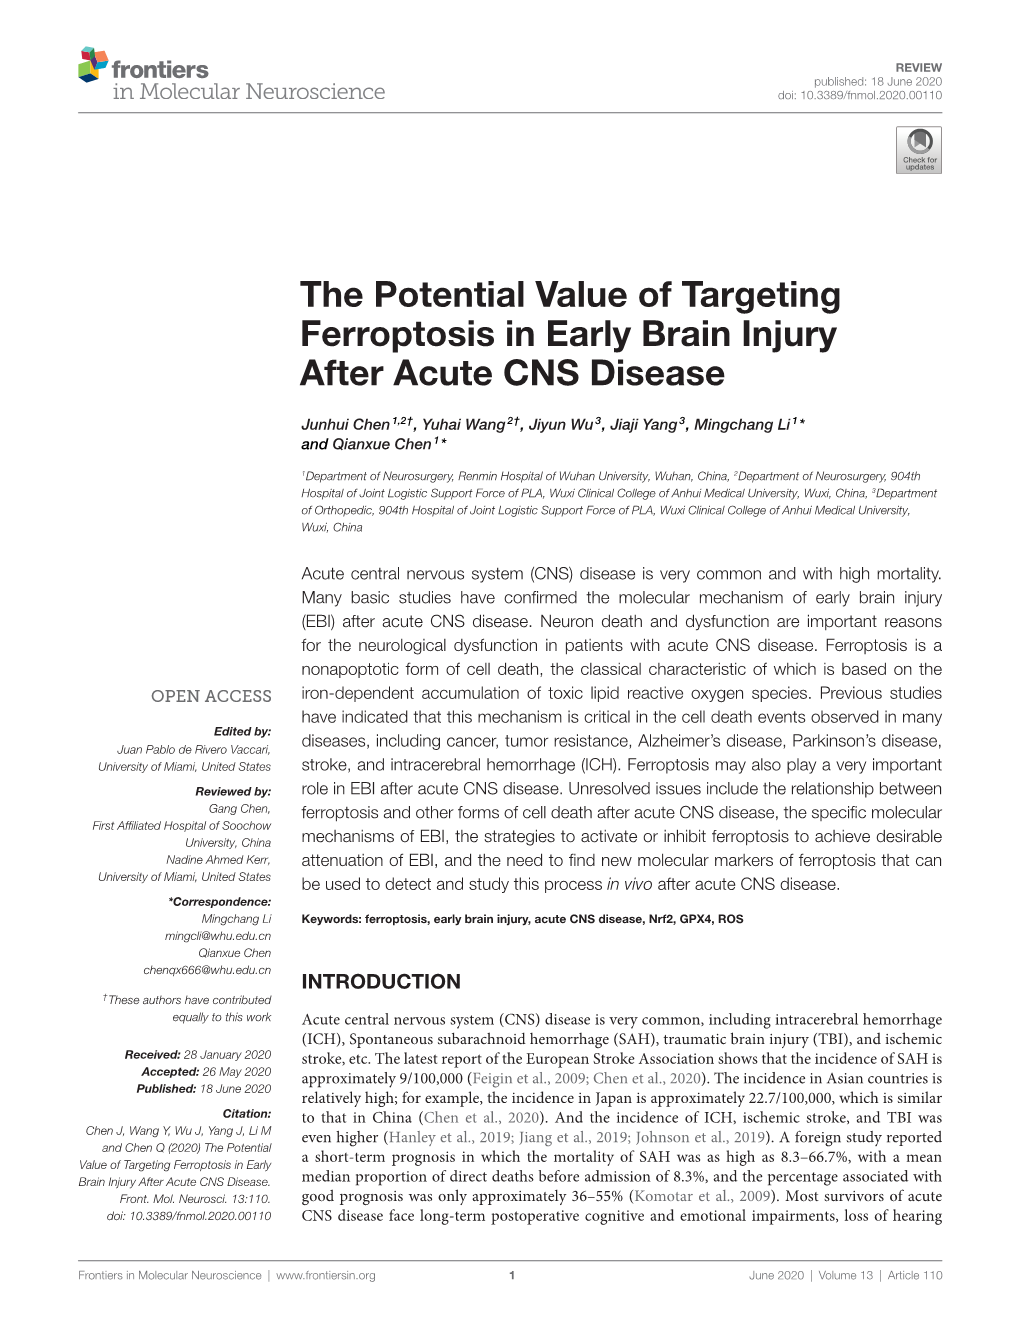 The Potential Value of Targeting Ferroptosis in Early Brain Injury After Acute CNS Disease